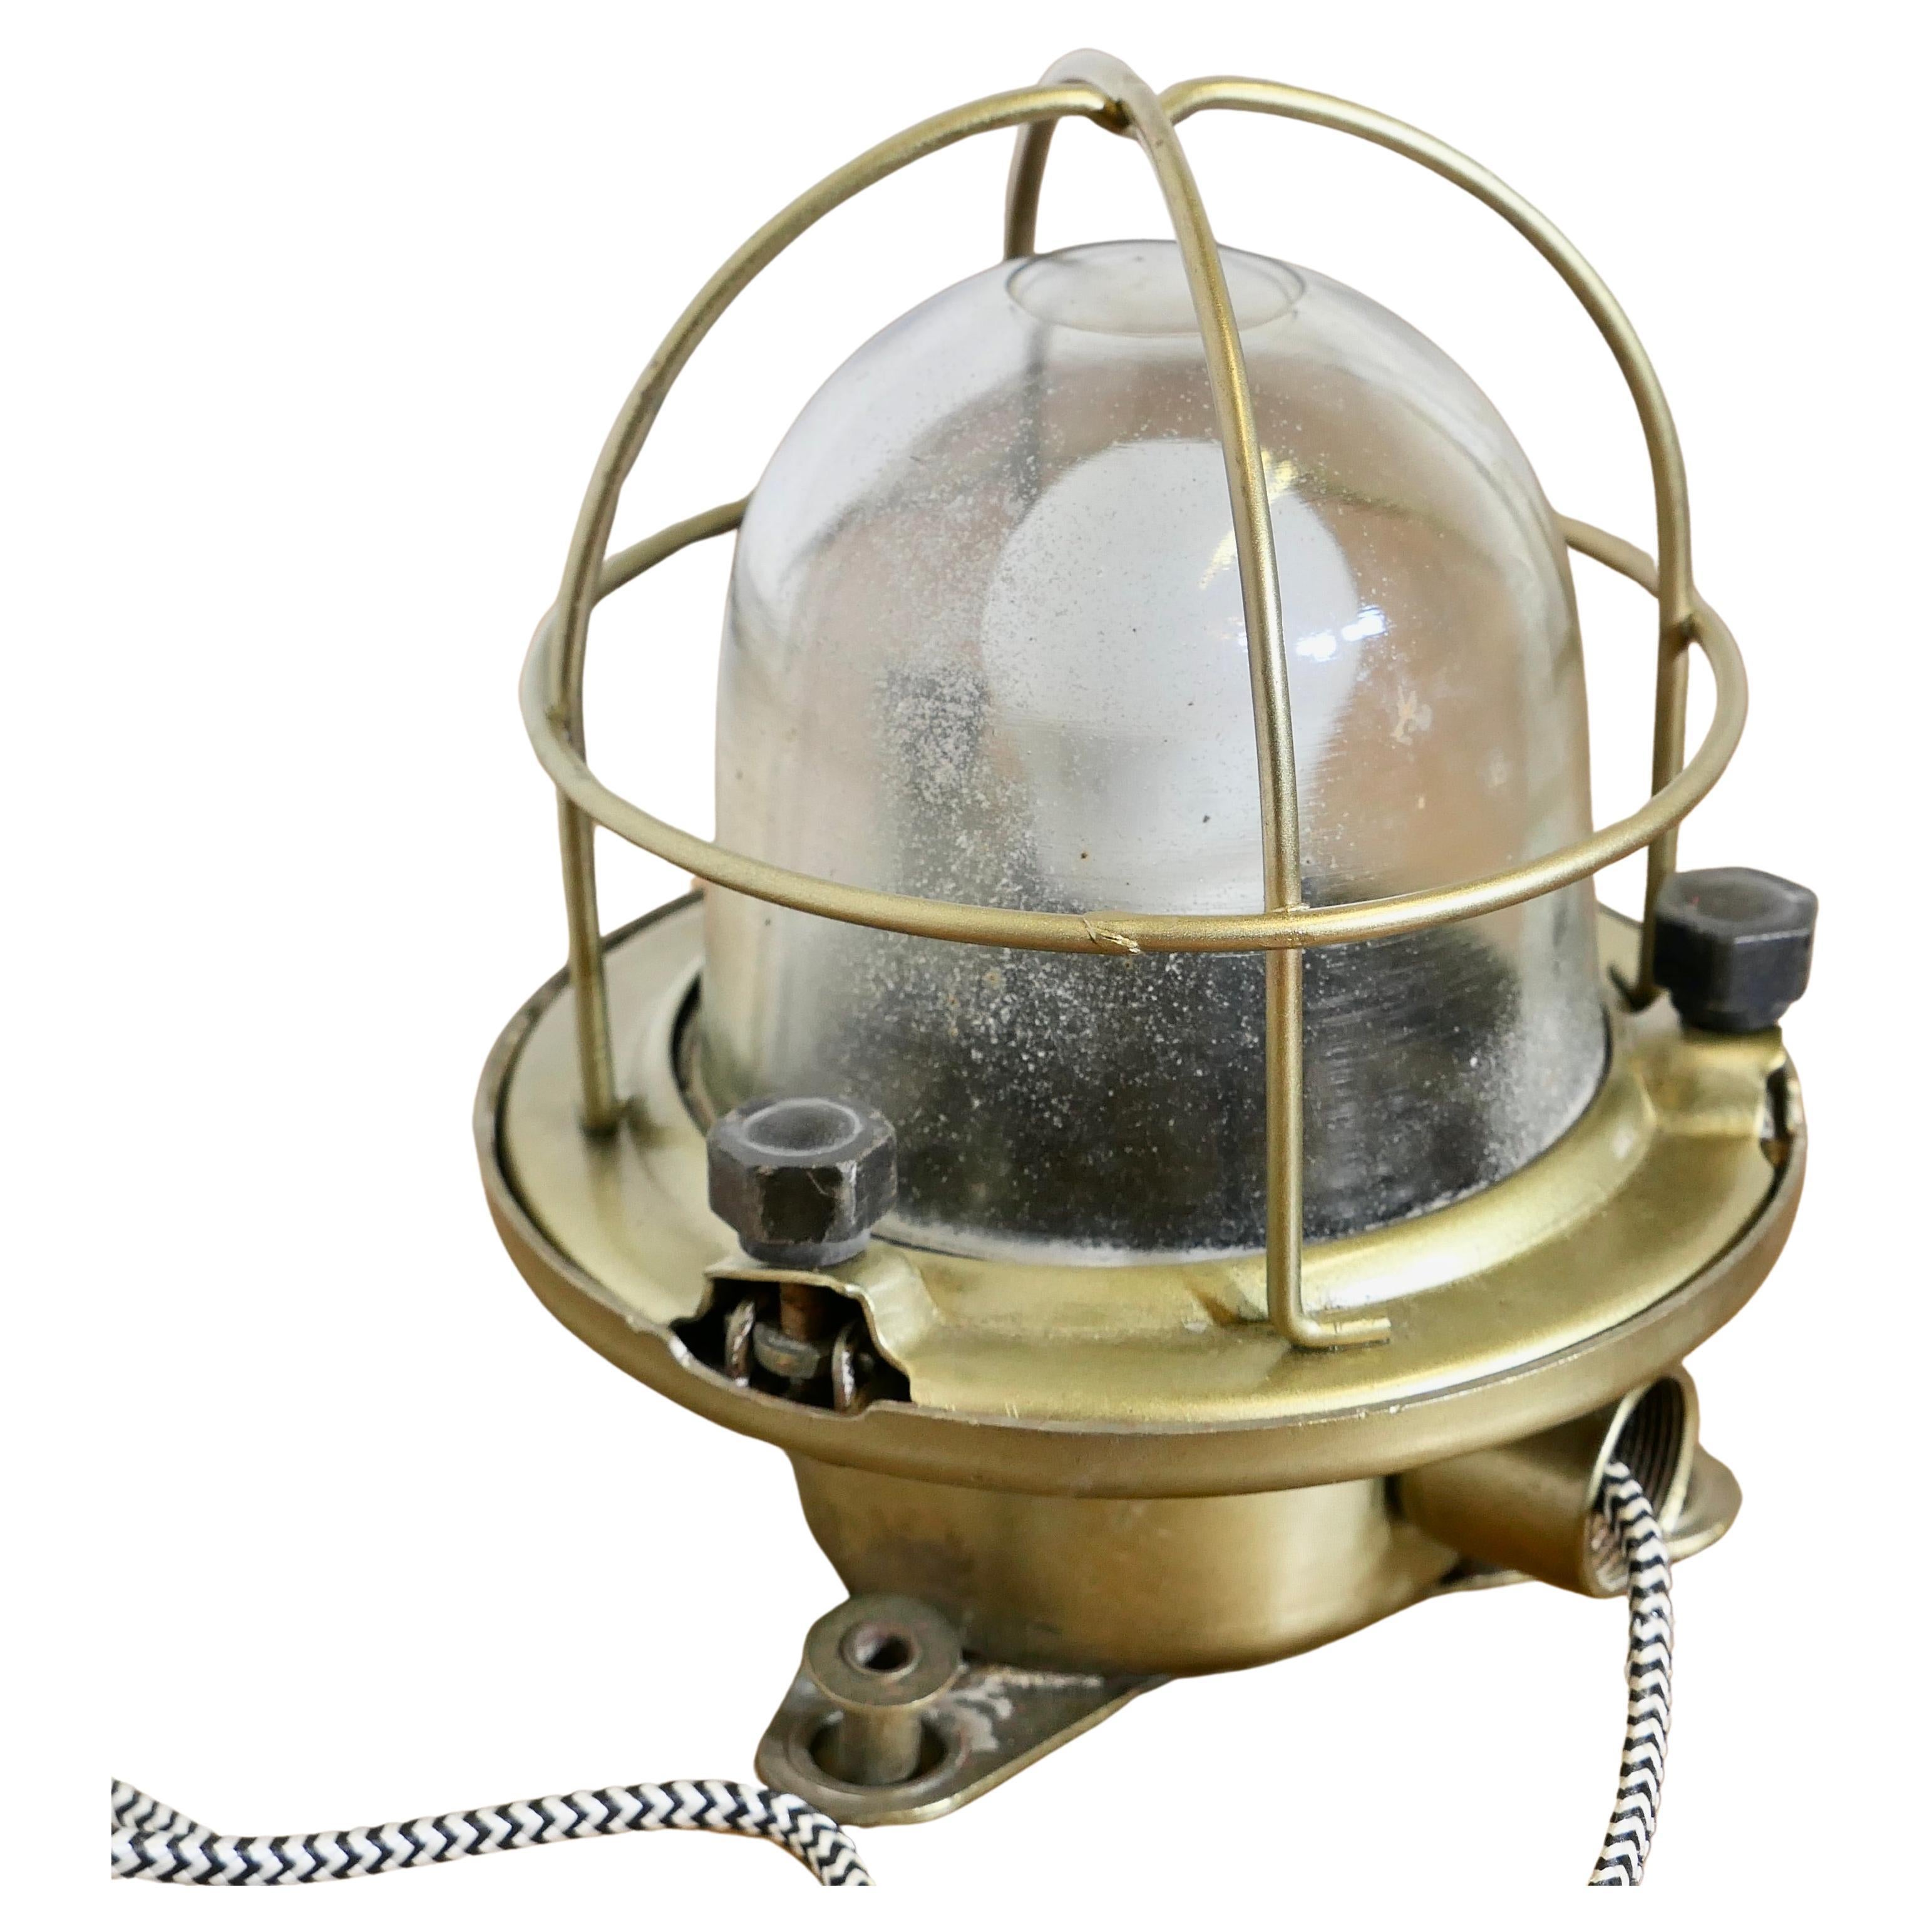 Vintage Nautical Brass Bulk Head Light    The Lamp is made in brass   For Sale